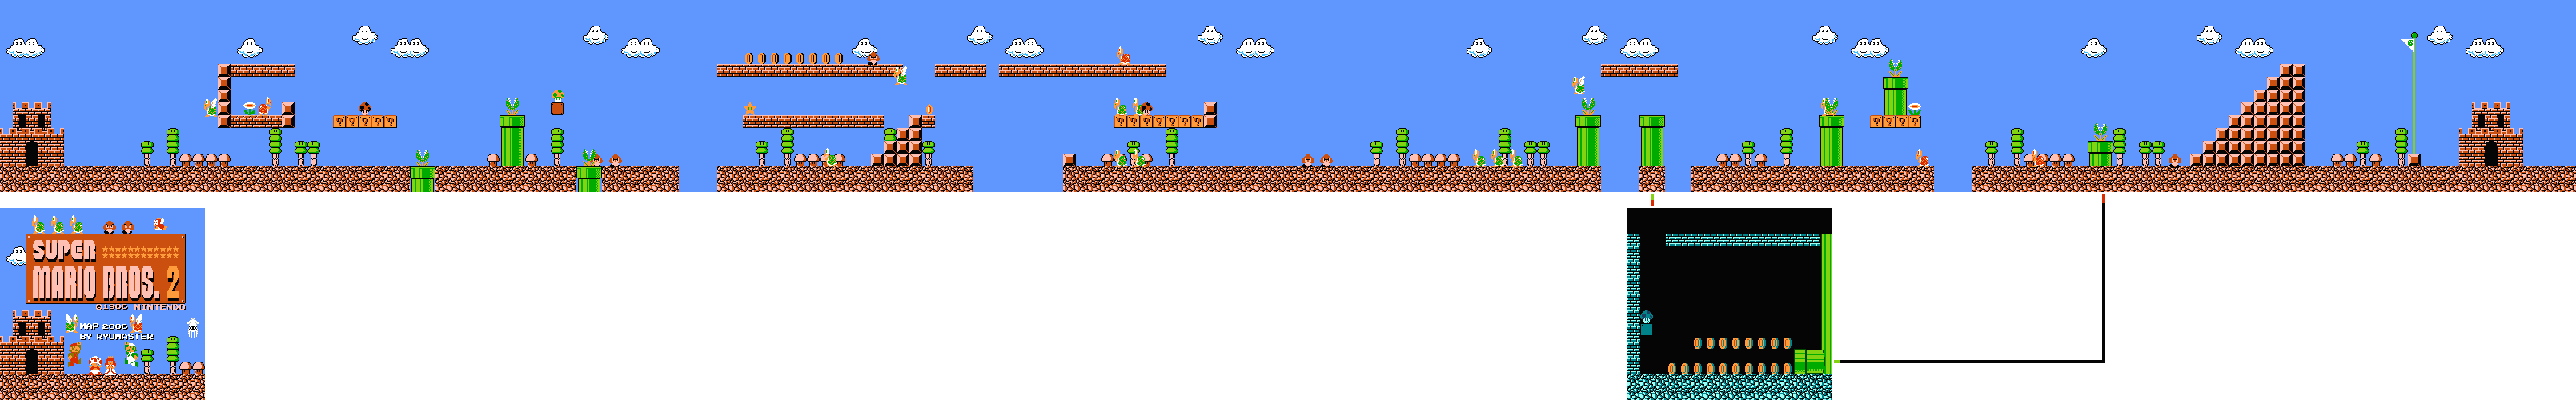 Super Mario Bros. The Lost Levels maps of every stage